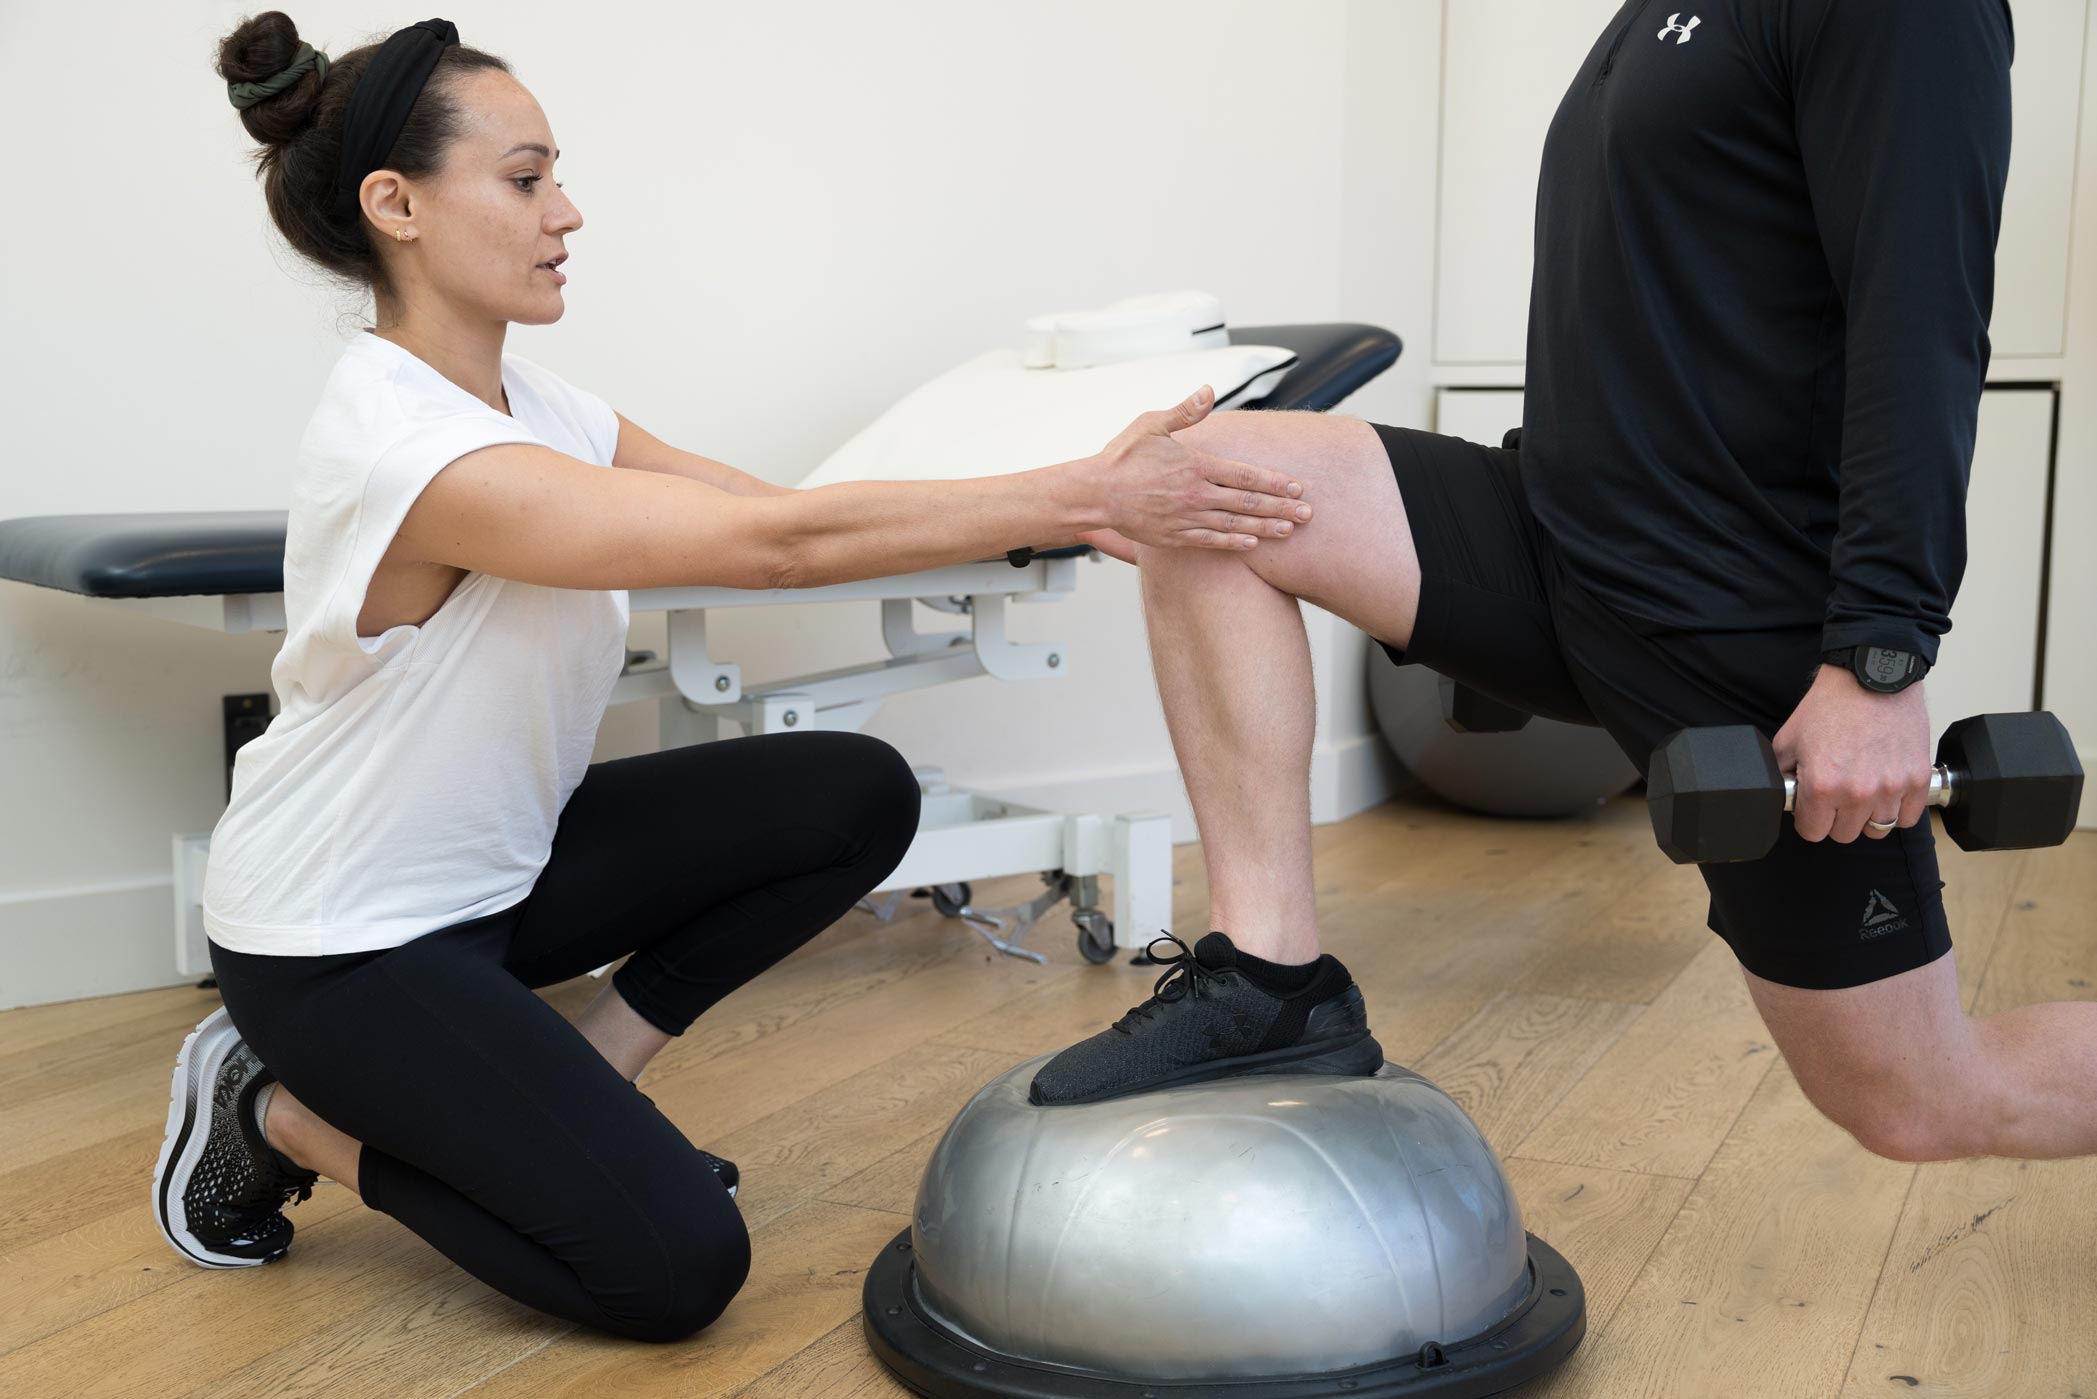 A physiotherapist treats a clients knee injury at a clinic in Balham, London during a health and fitness personal branding photography shoot